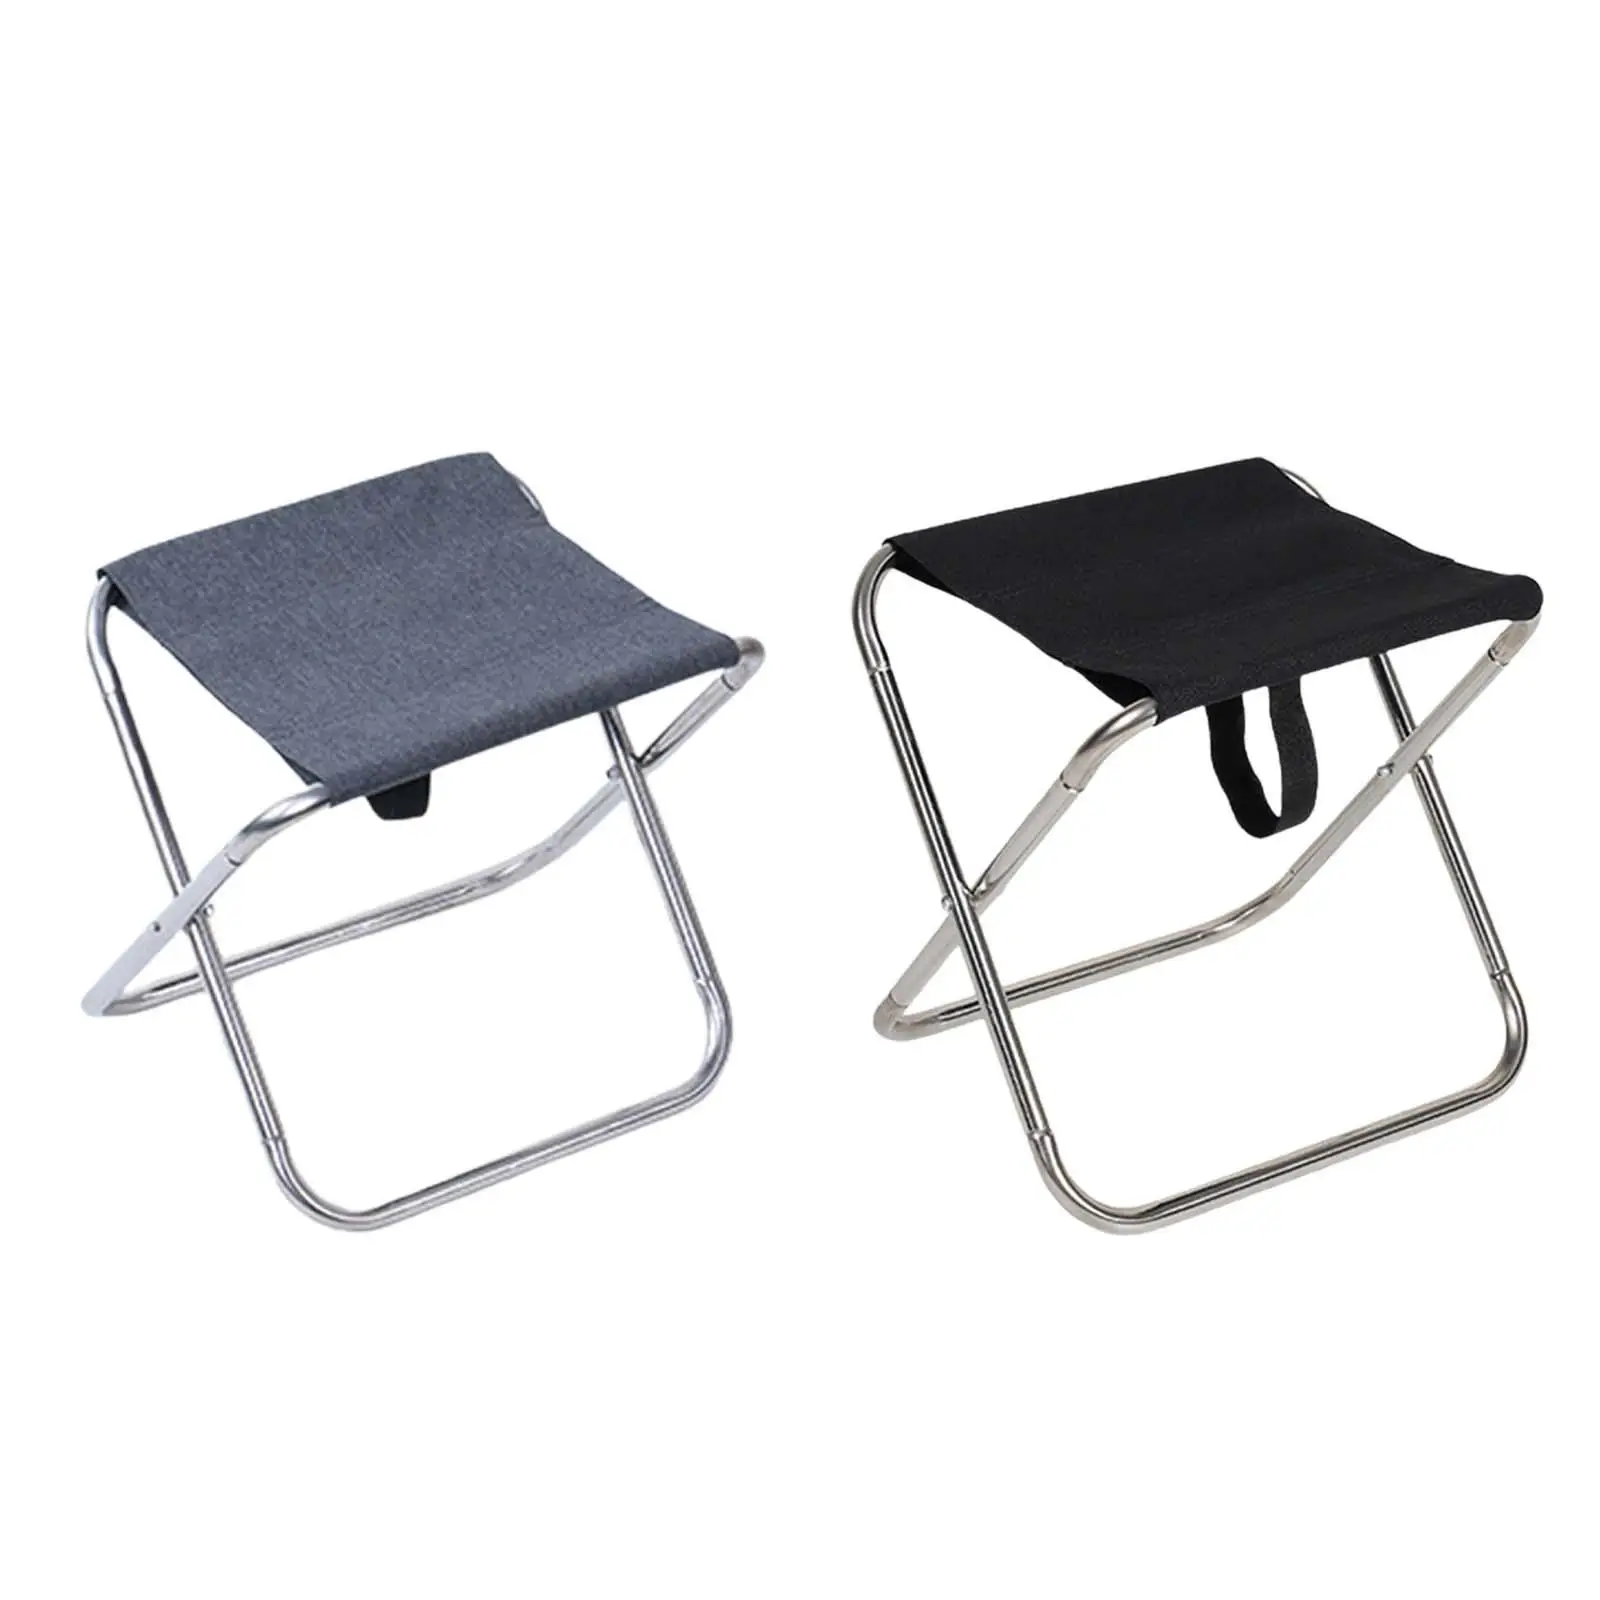 Camping Stool Folding Lightweight Mini Camping Chair Adults Fishing Seat Saddle Chair for Picnic Gardening Concert Party Lawn